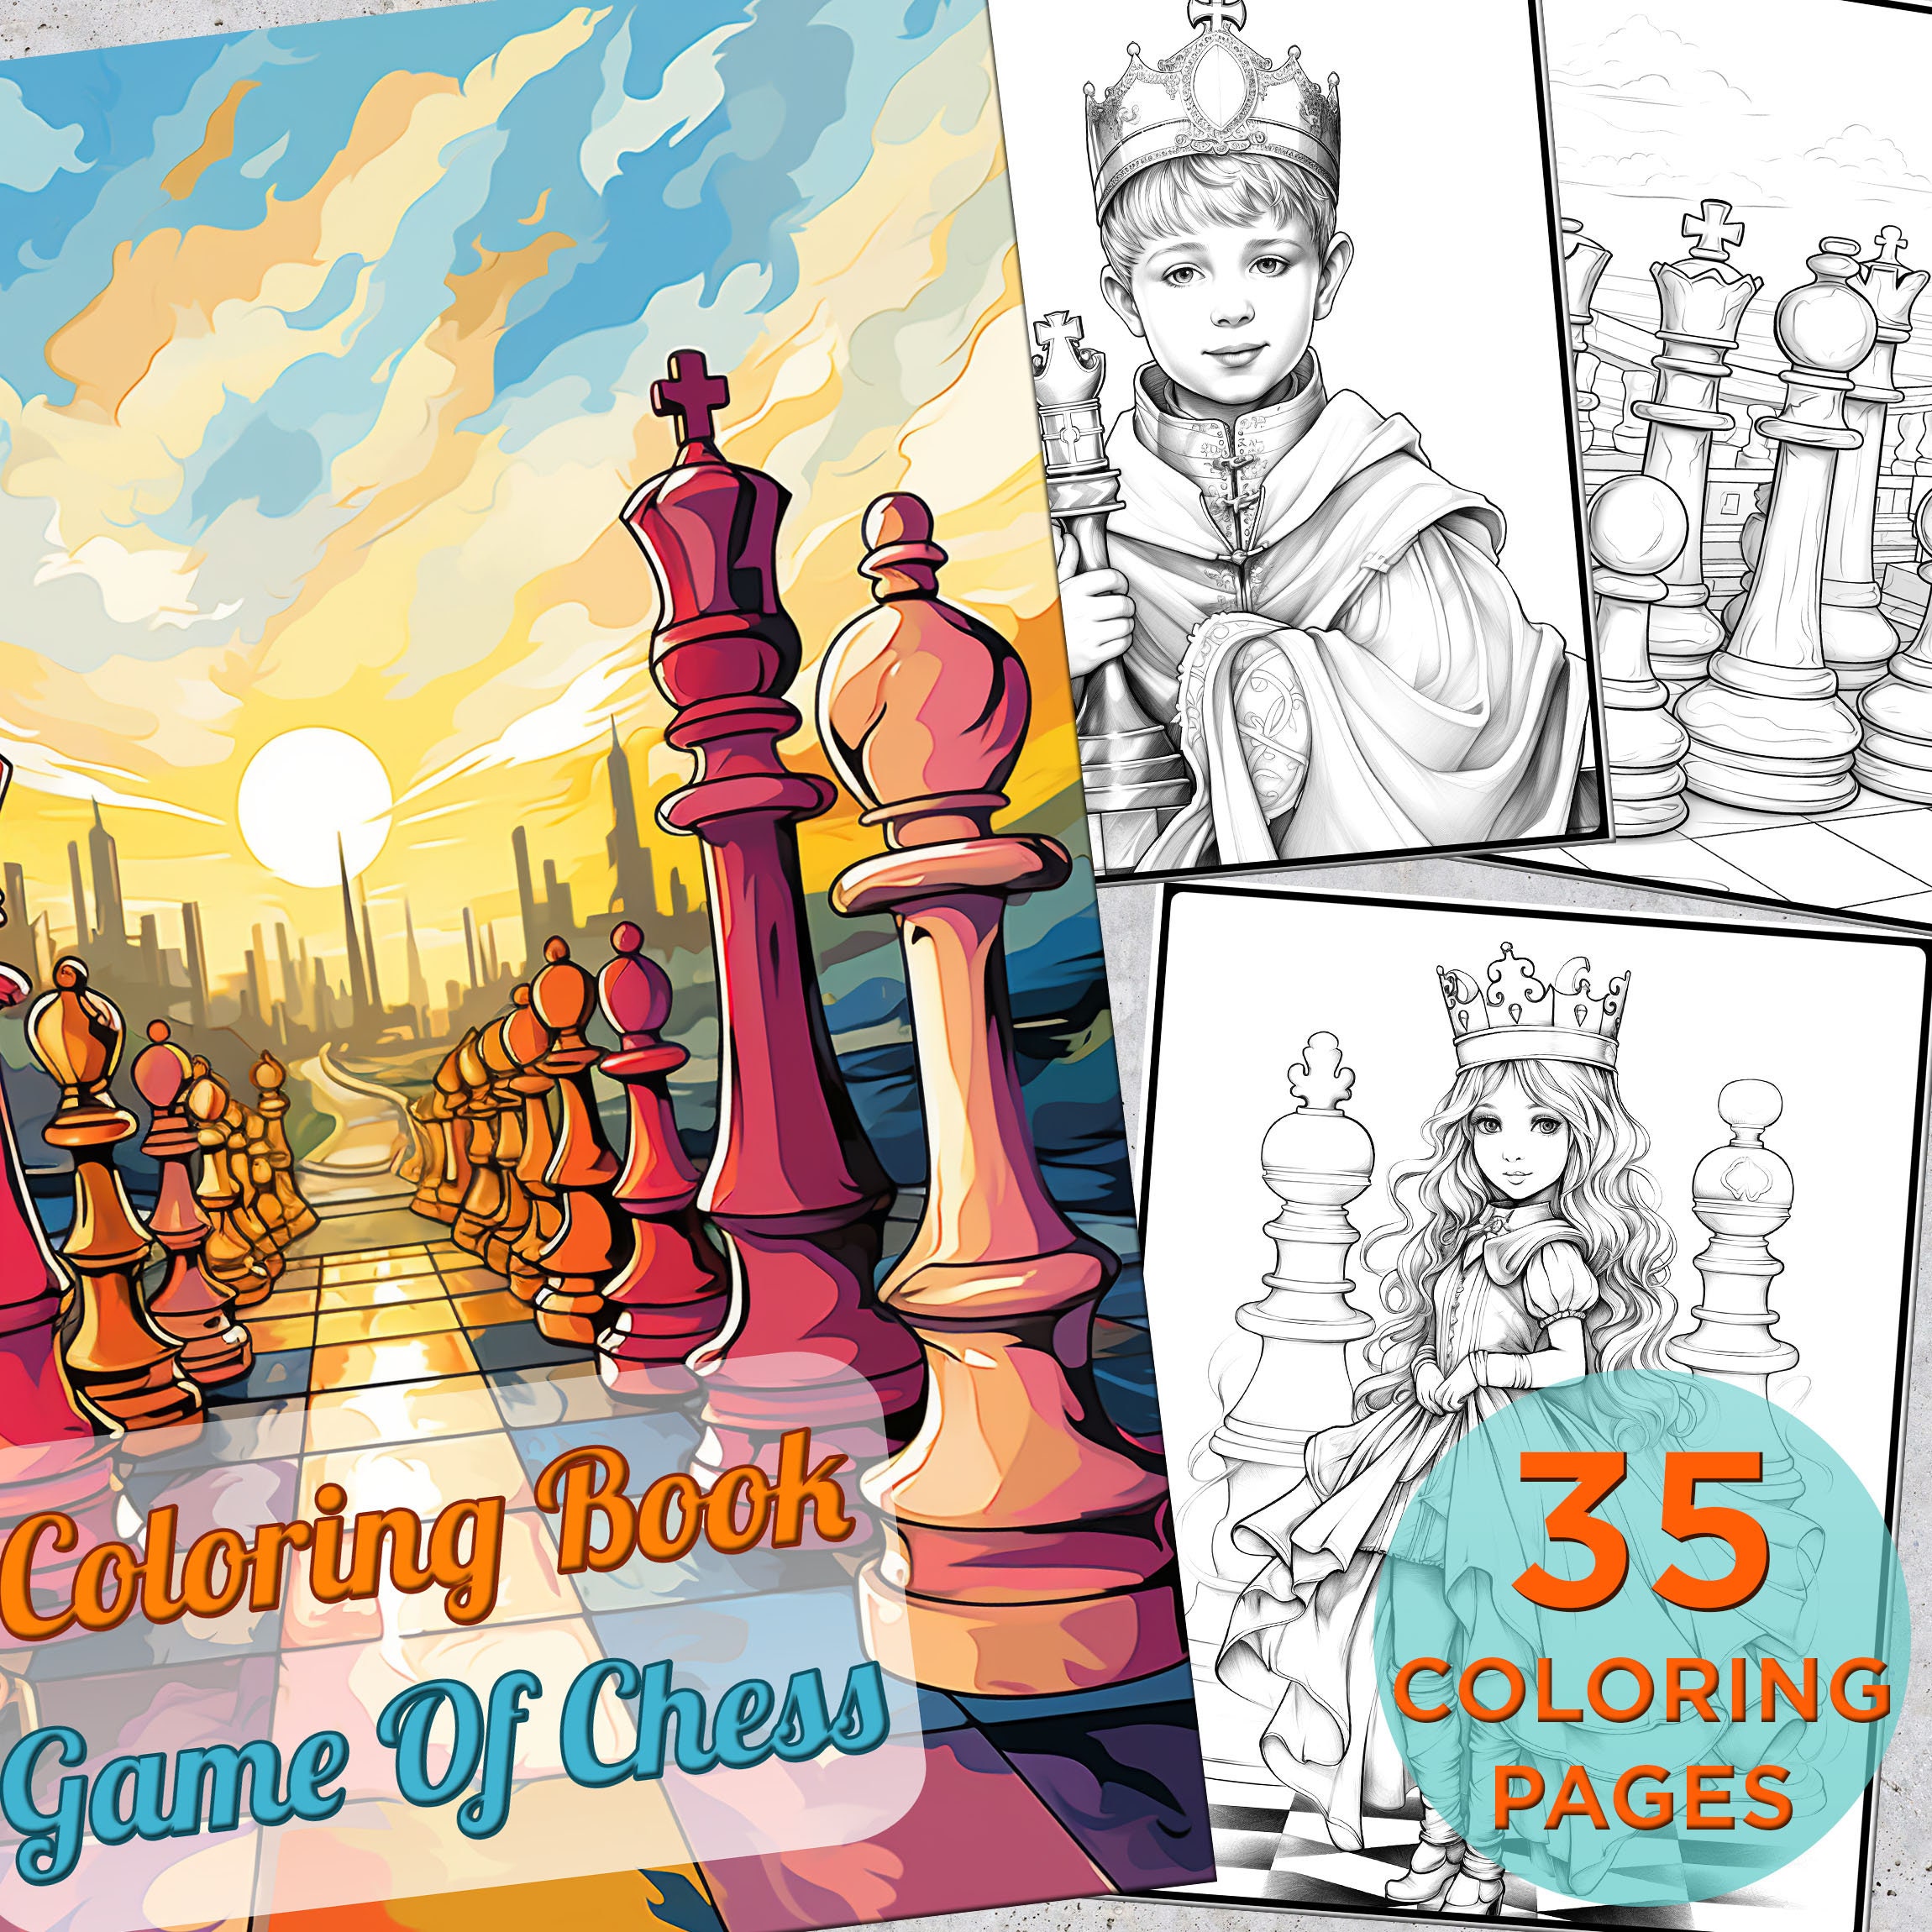 The Game Of Chess By Arturo Ricci Painting Artwork Paint By Numbers Kit DIY